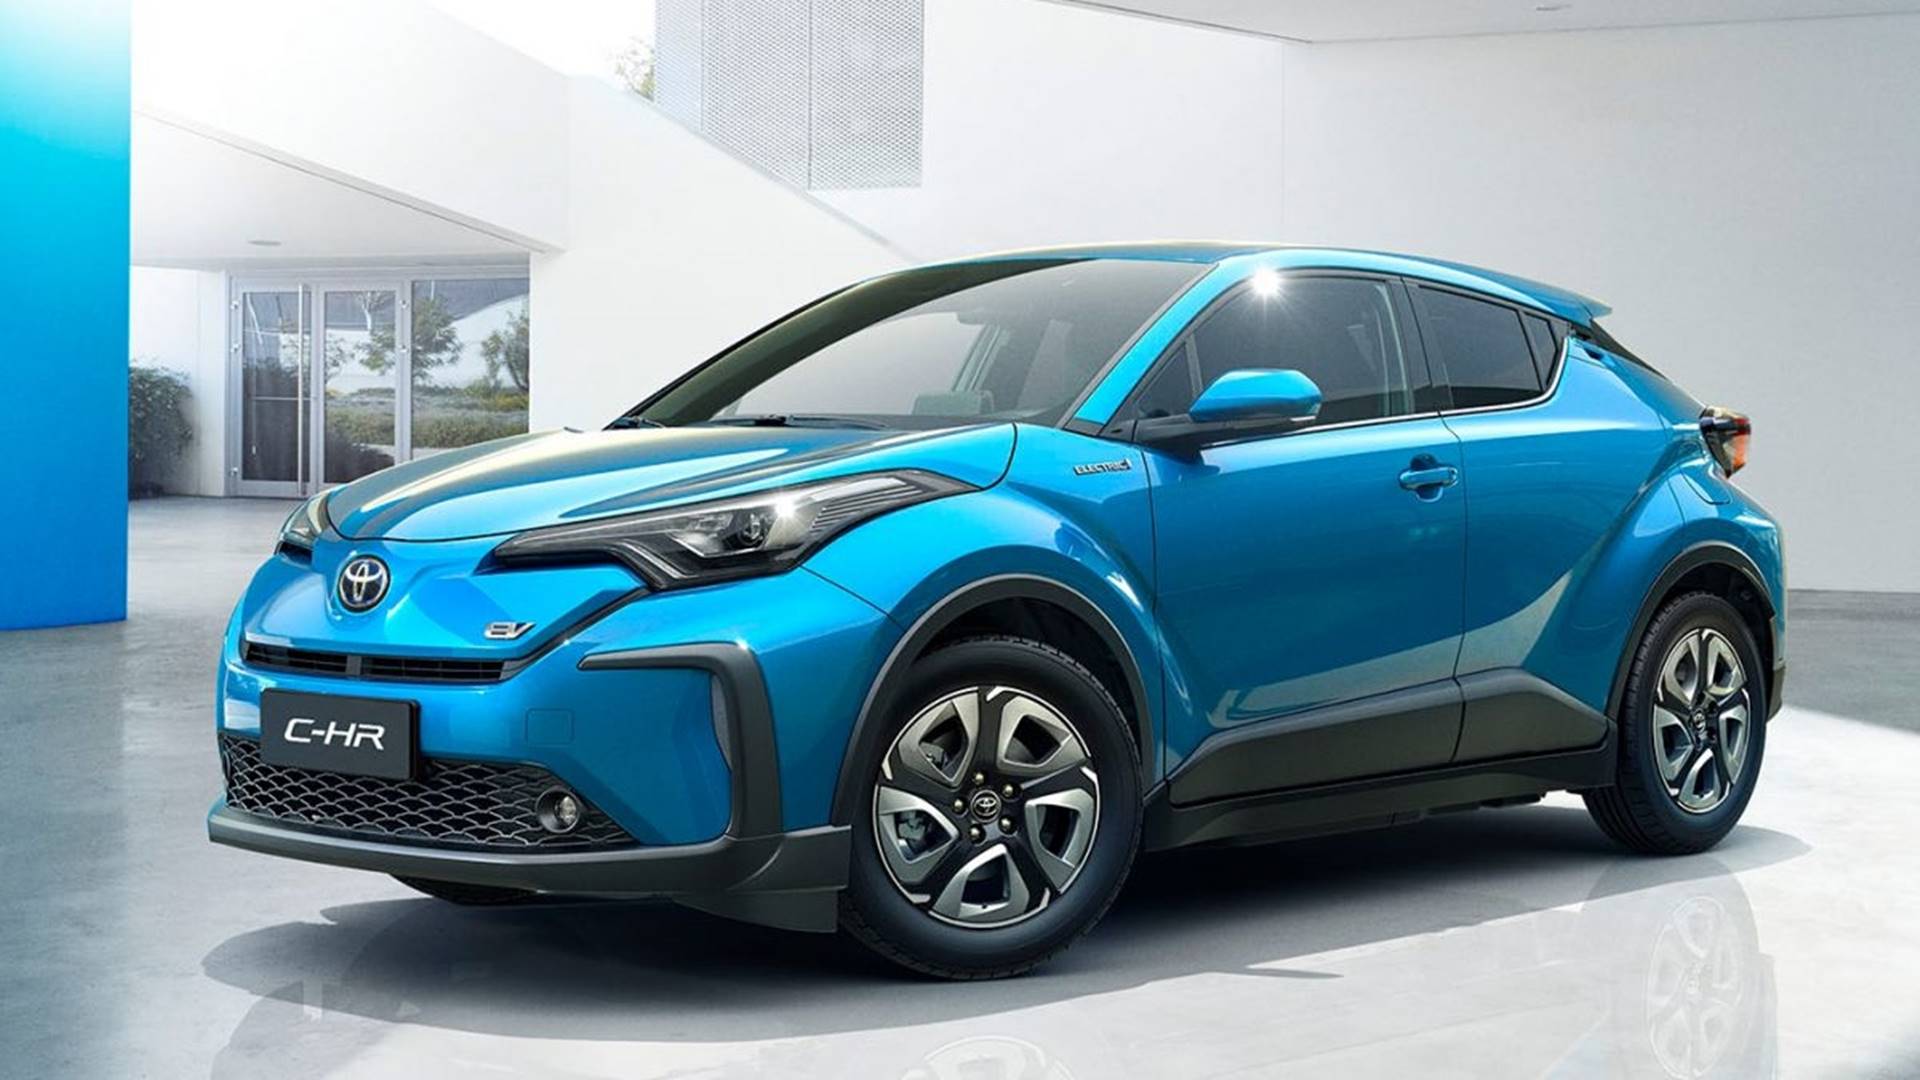 The European Toyota C-HR will have electric - Latest News